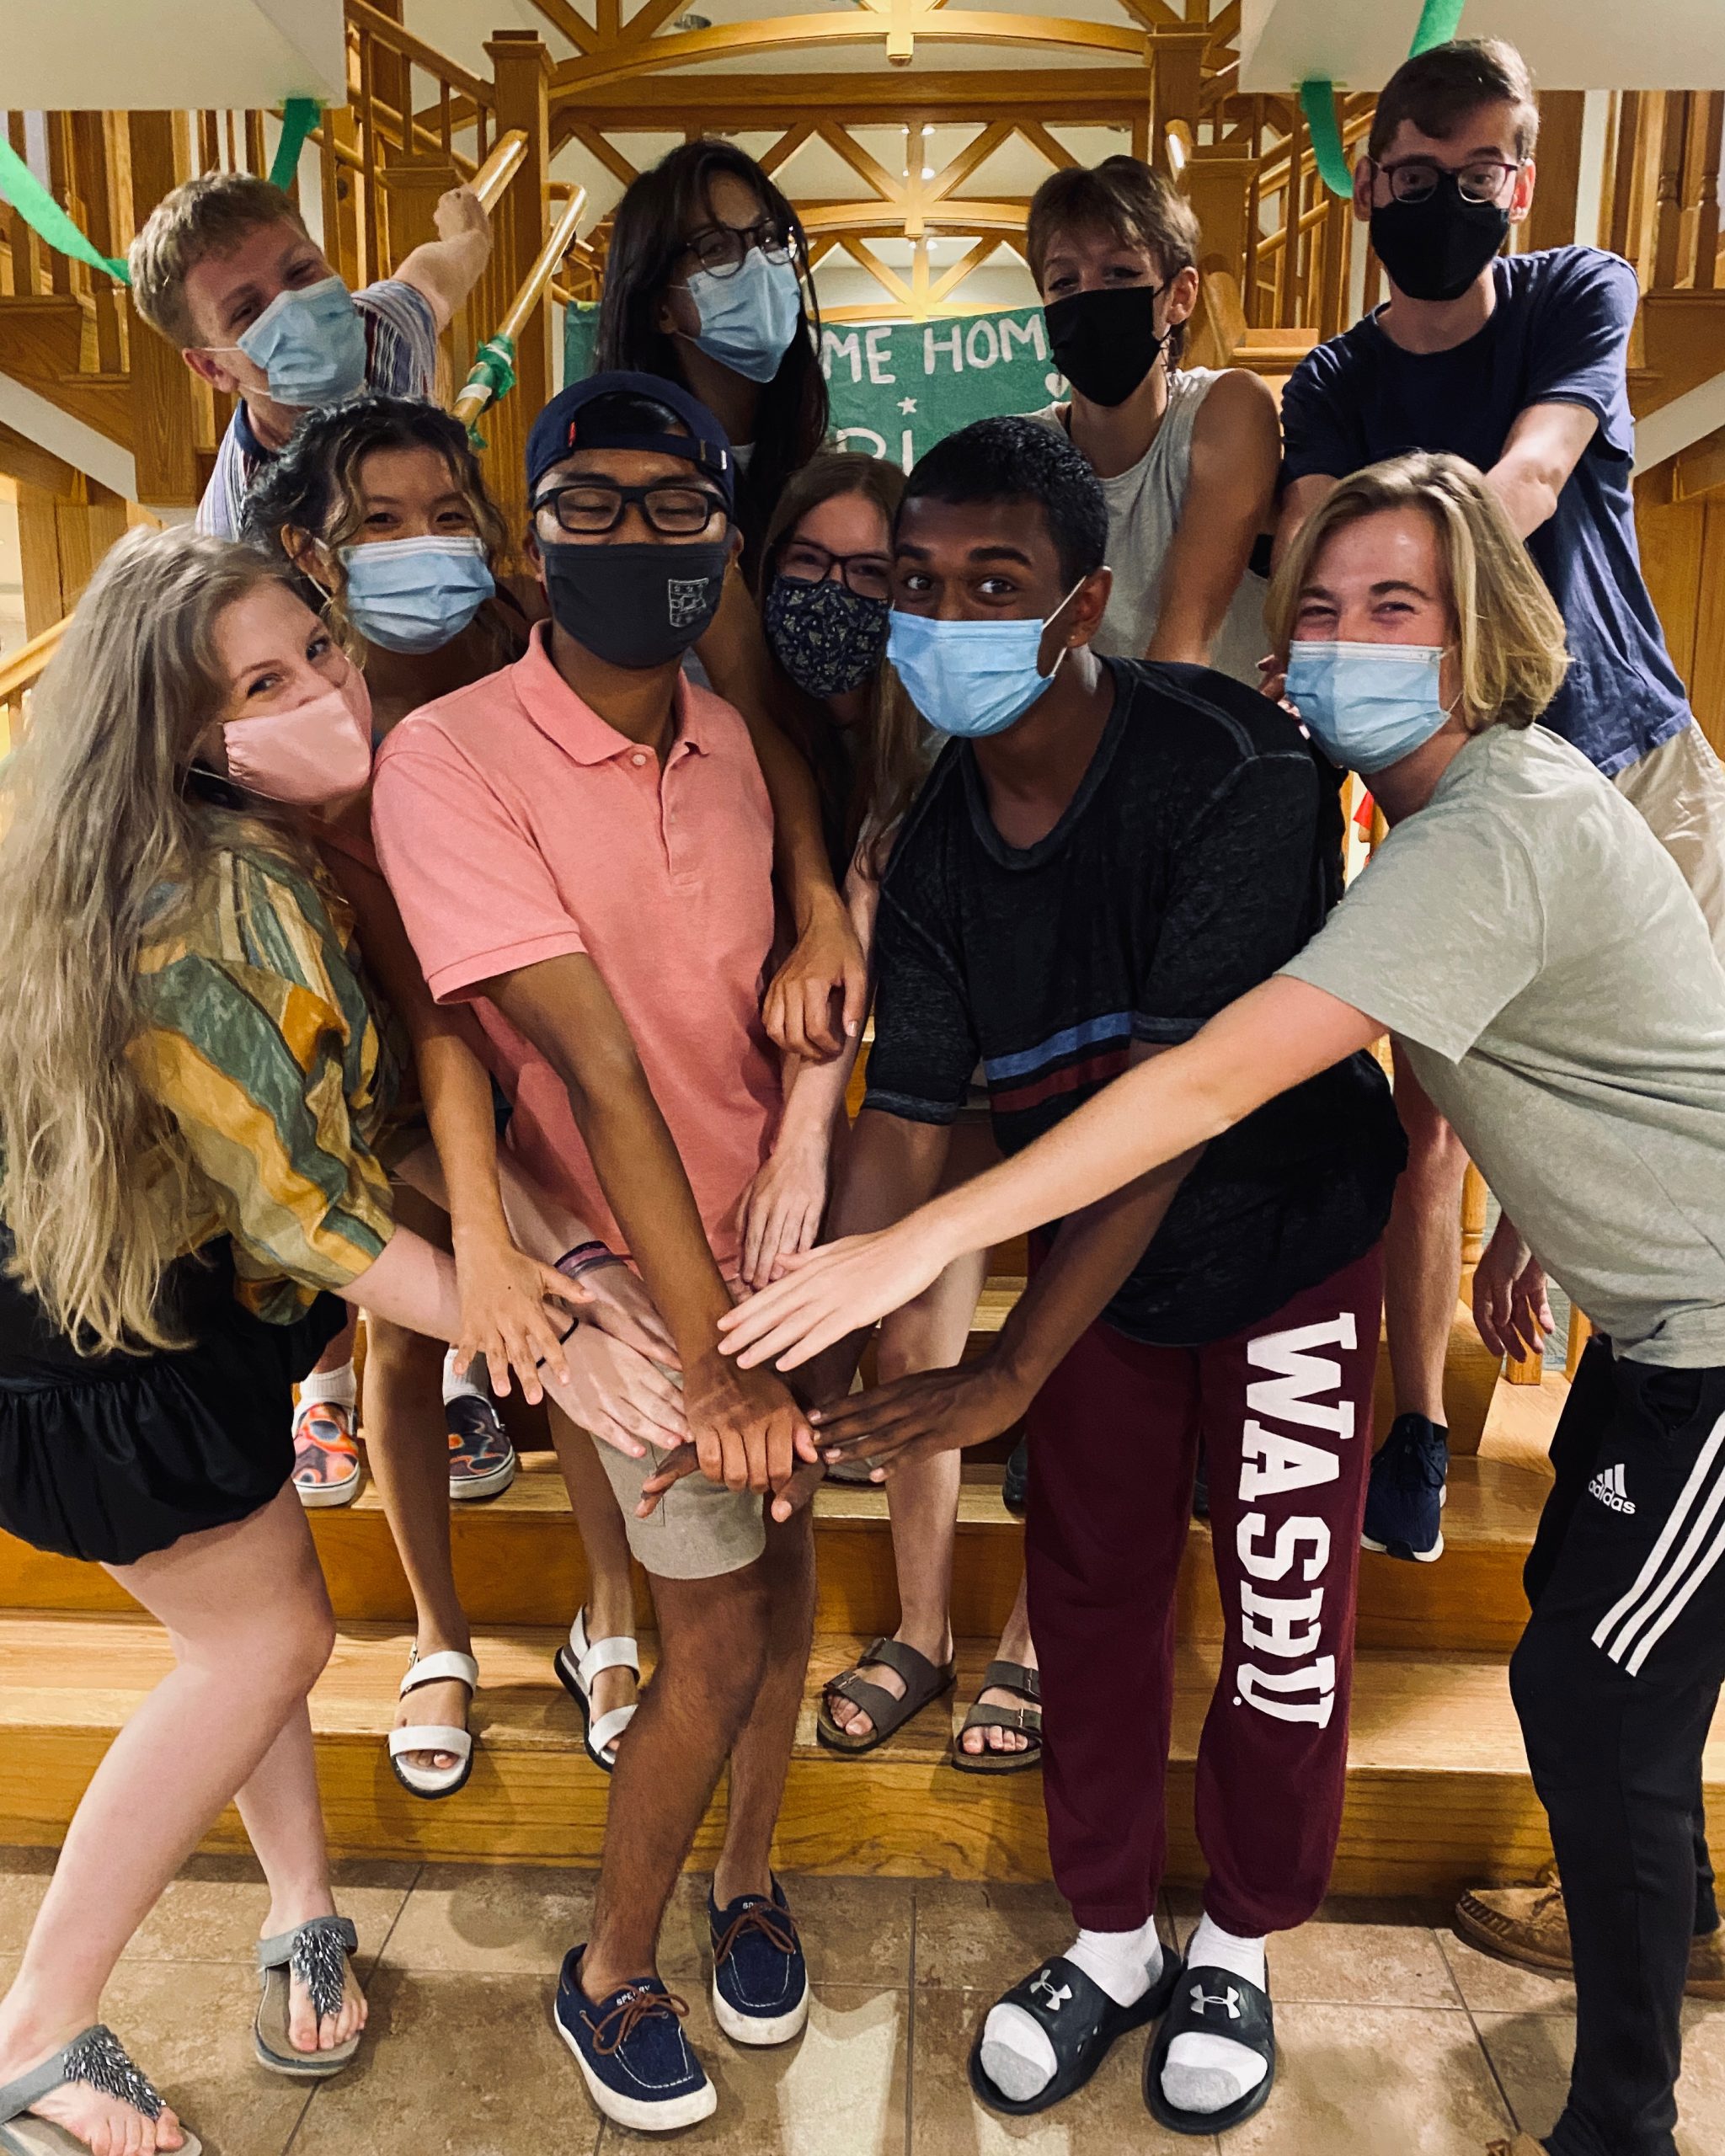 A group of masked students stand together with their hands outstretched.